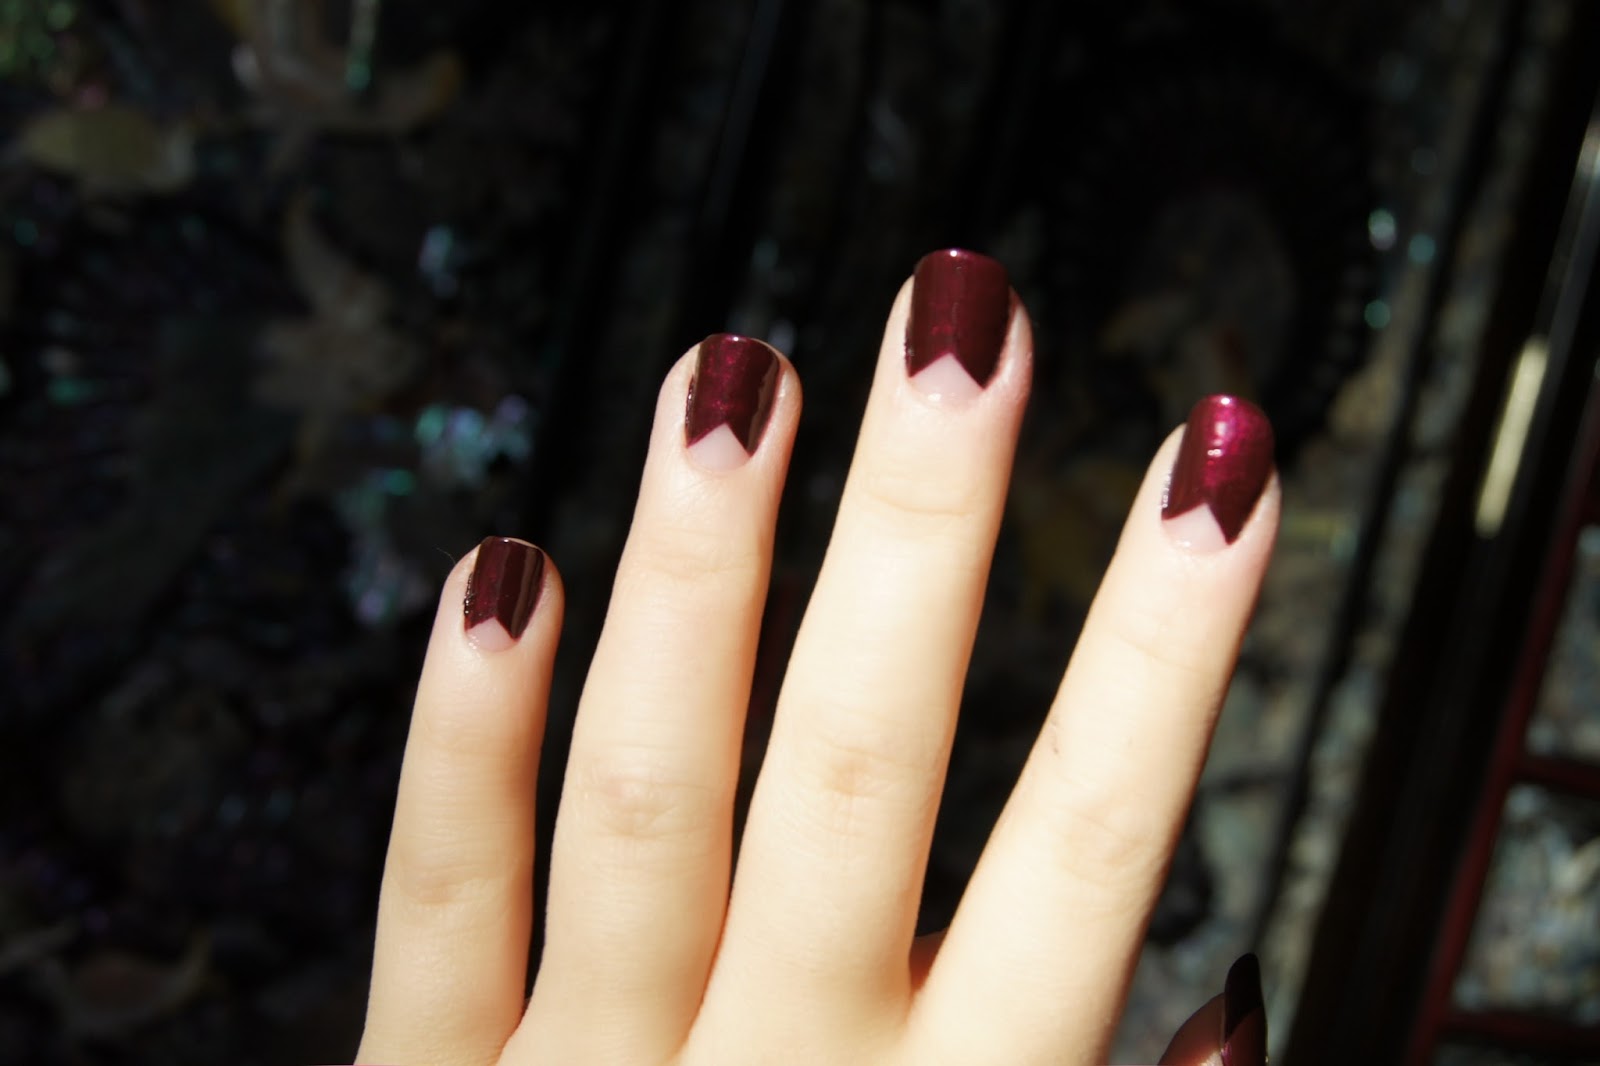 NOTD series: No.1 Burgundy Chevrons  Barely There Beauty - A Lifestyle  Blog from the Home Counties